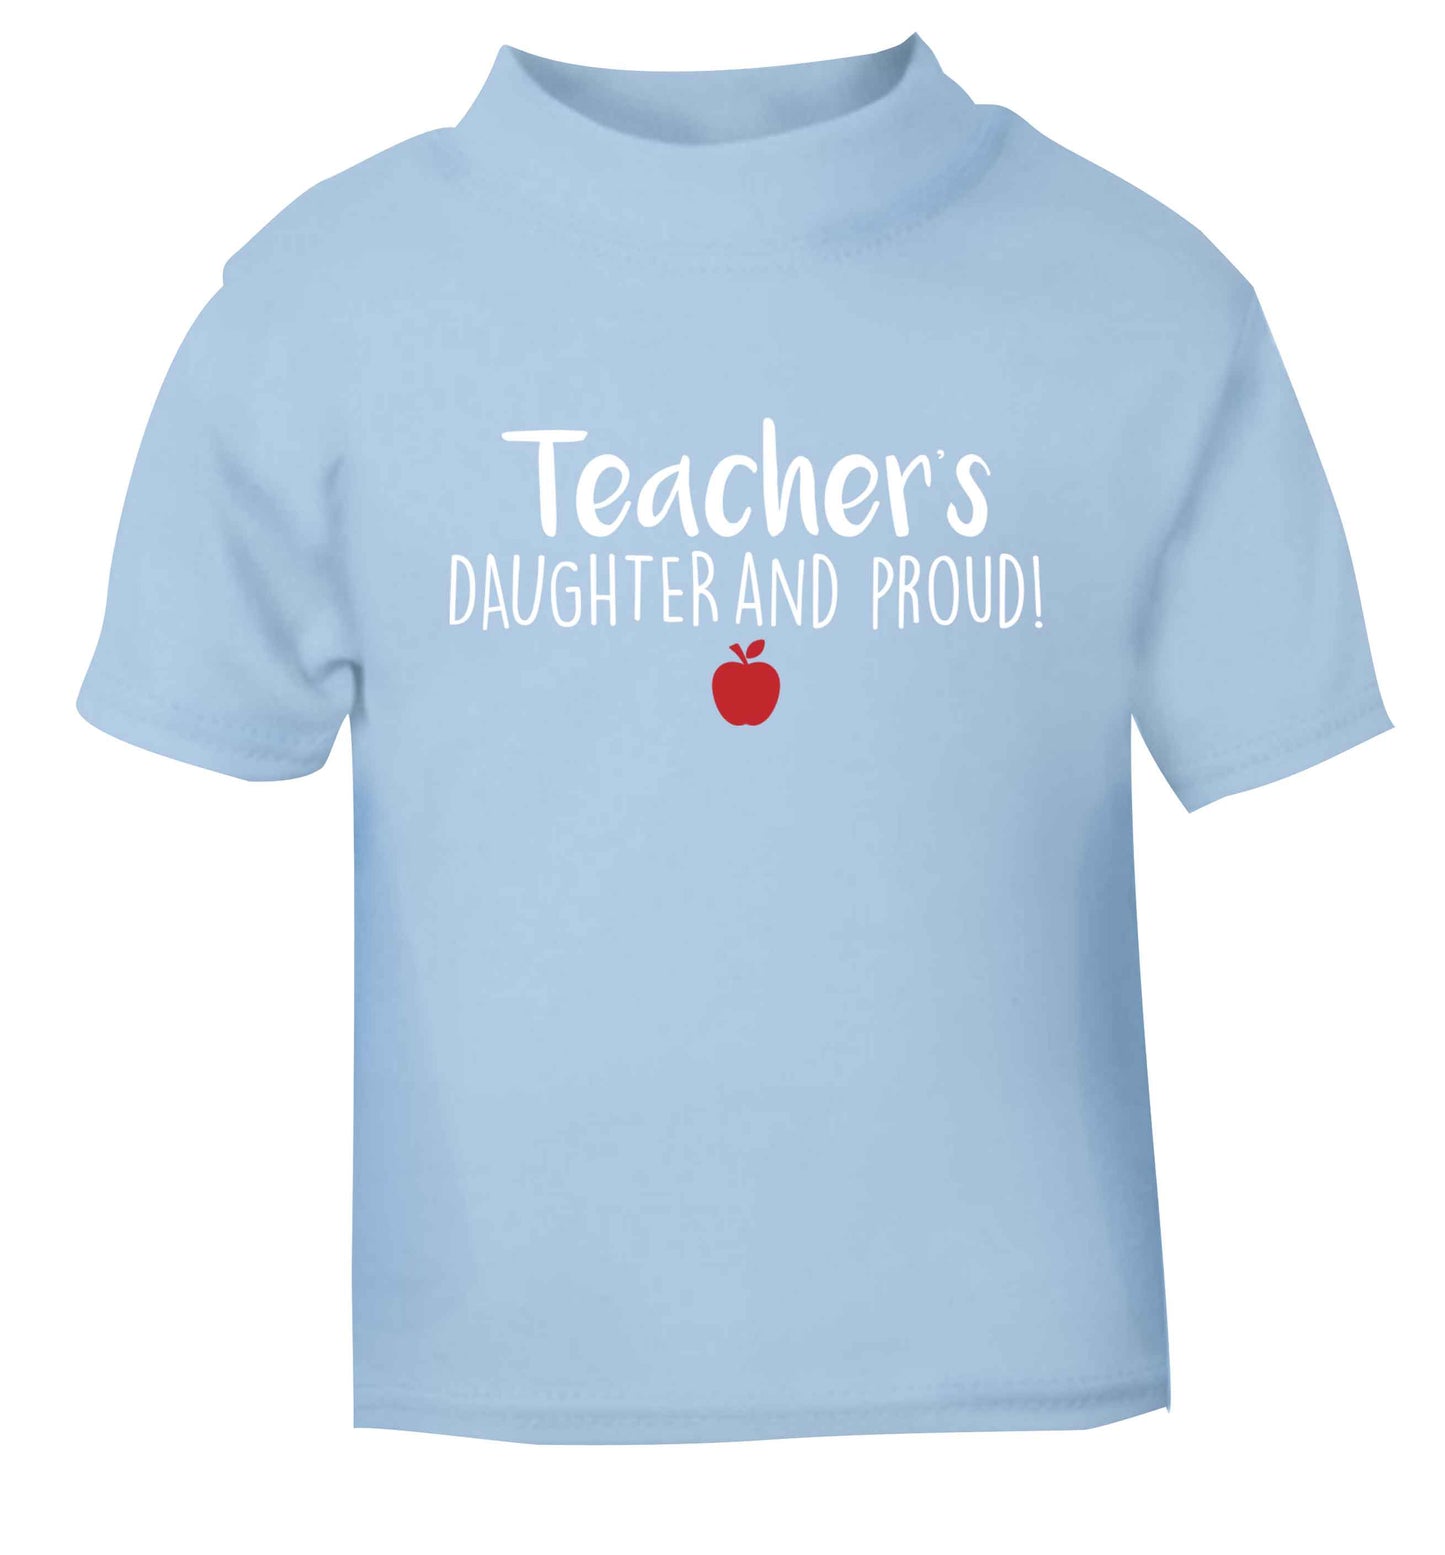 Teachers daughter and proud light blue baby toddler Tshirt 2 Years